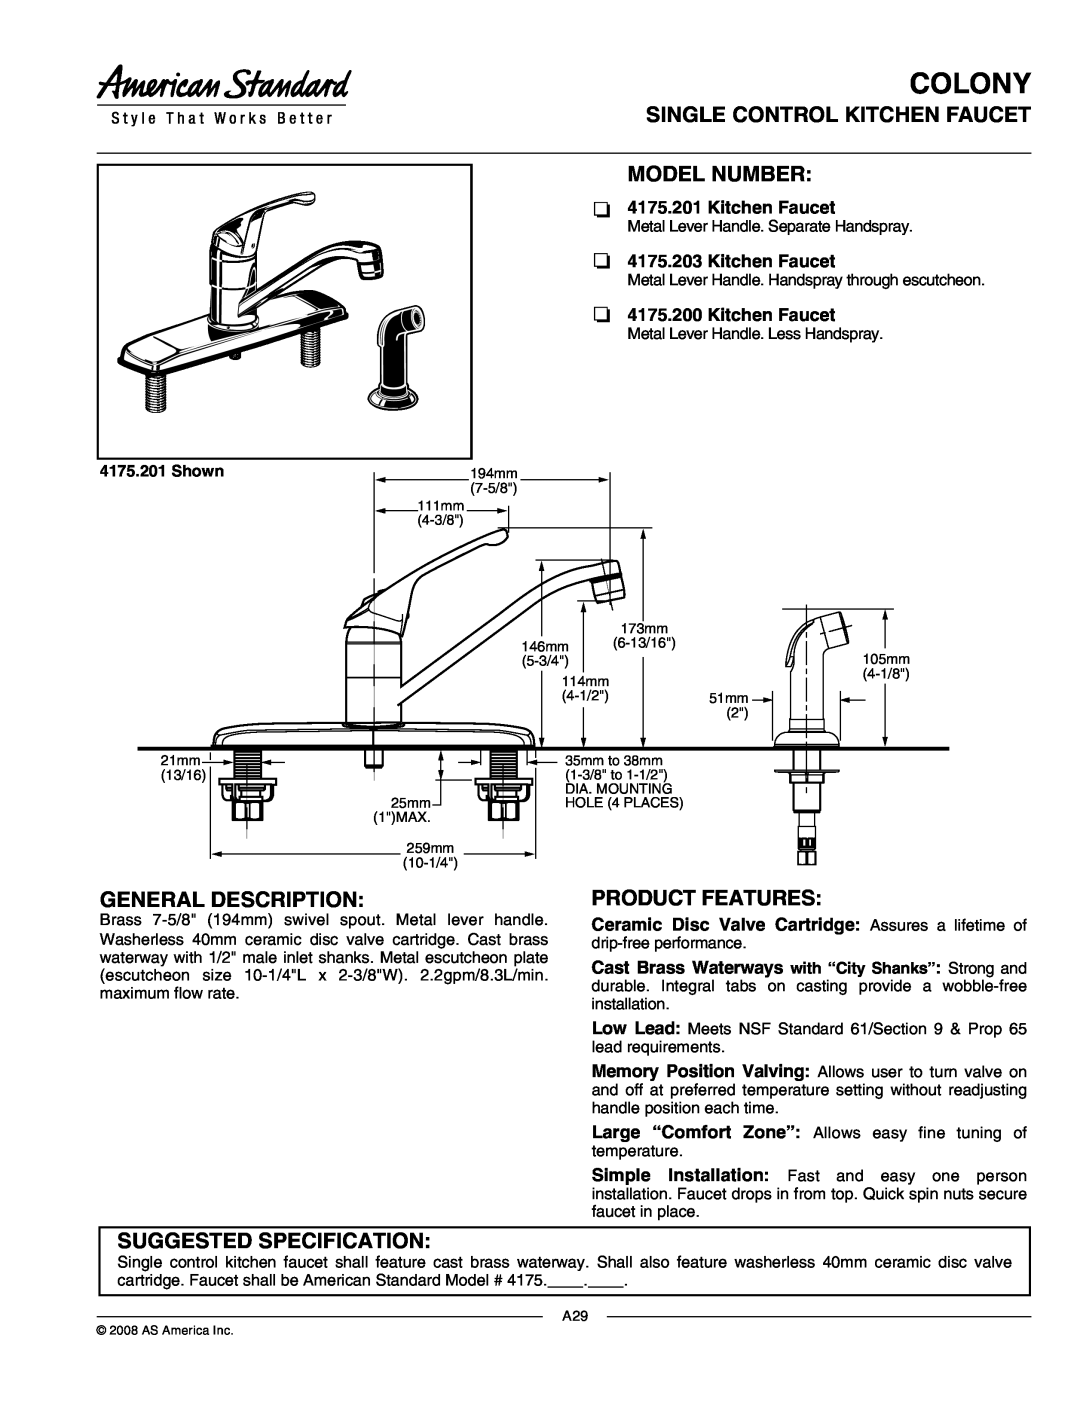 American Standard COLONY SINGLE CONTROL KITCHEN FAUCET installation instructions Single Control Kitchen Faucets, Colony 